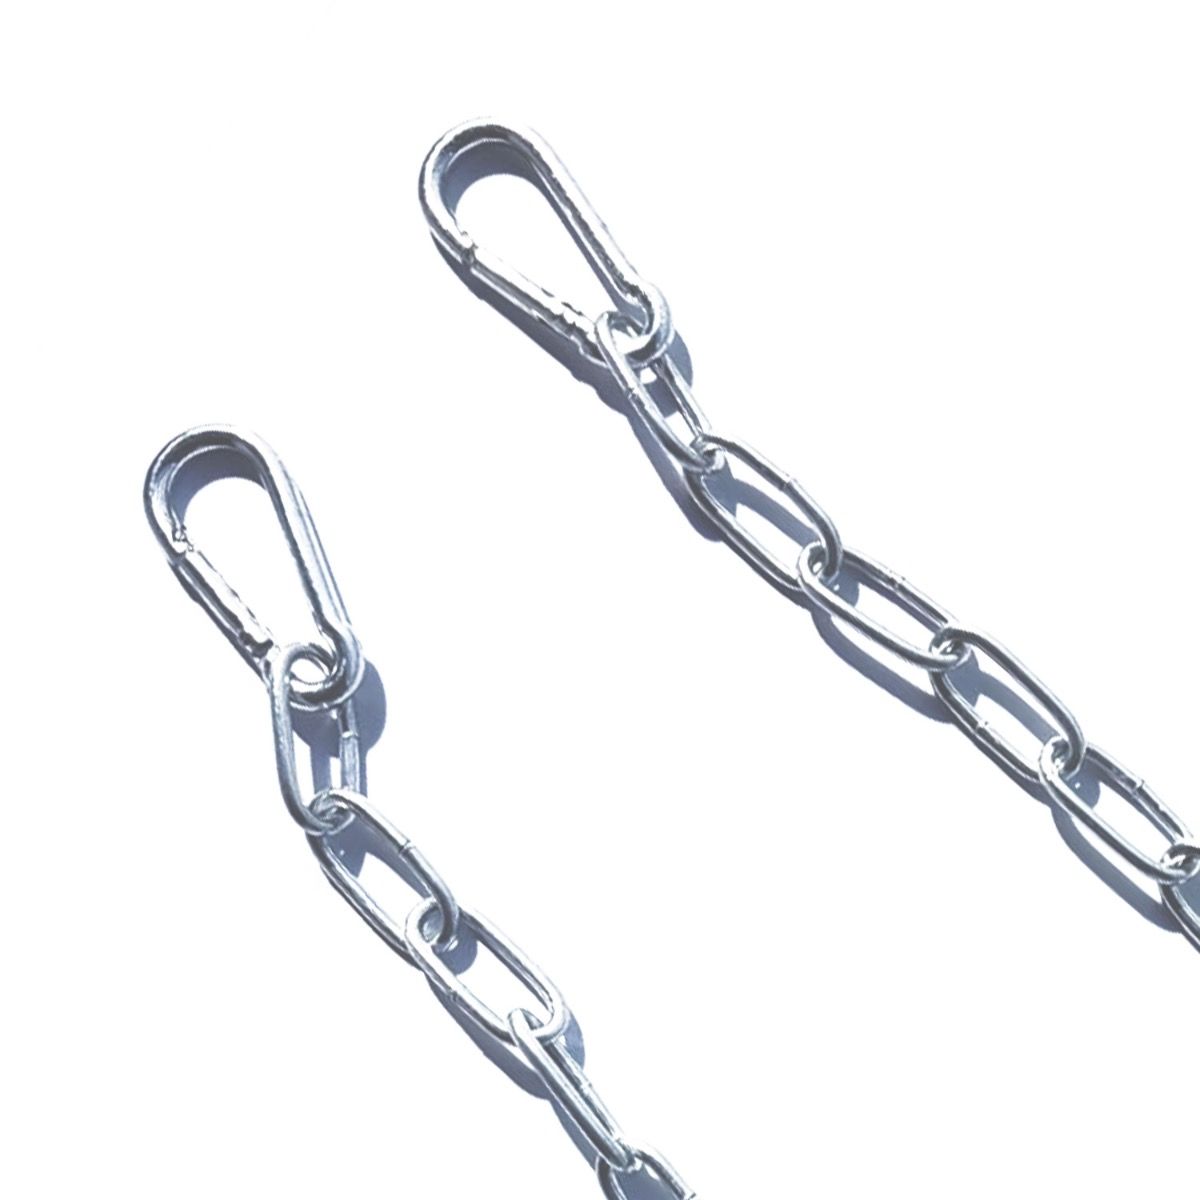 FASTENING CHAINS WITH 10 SNAP HOOKS (5 PCS.)